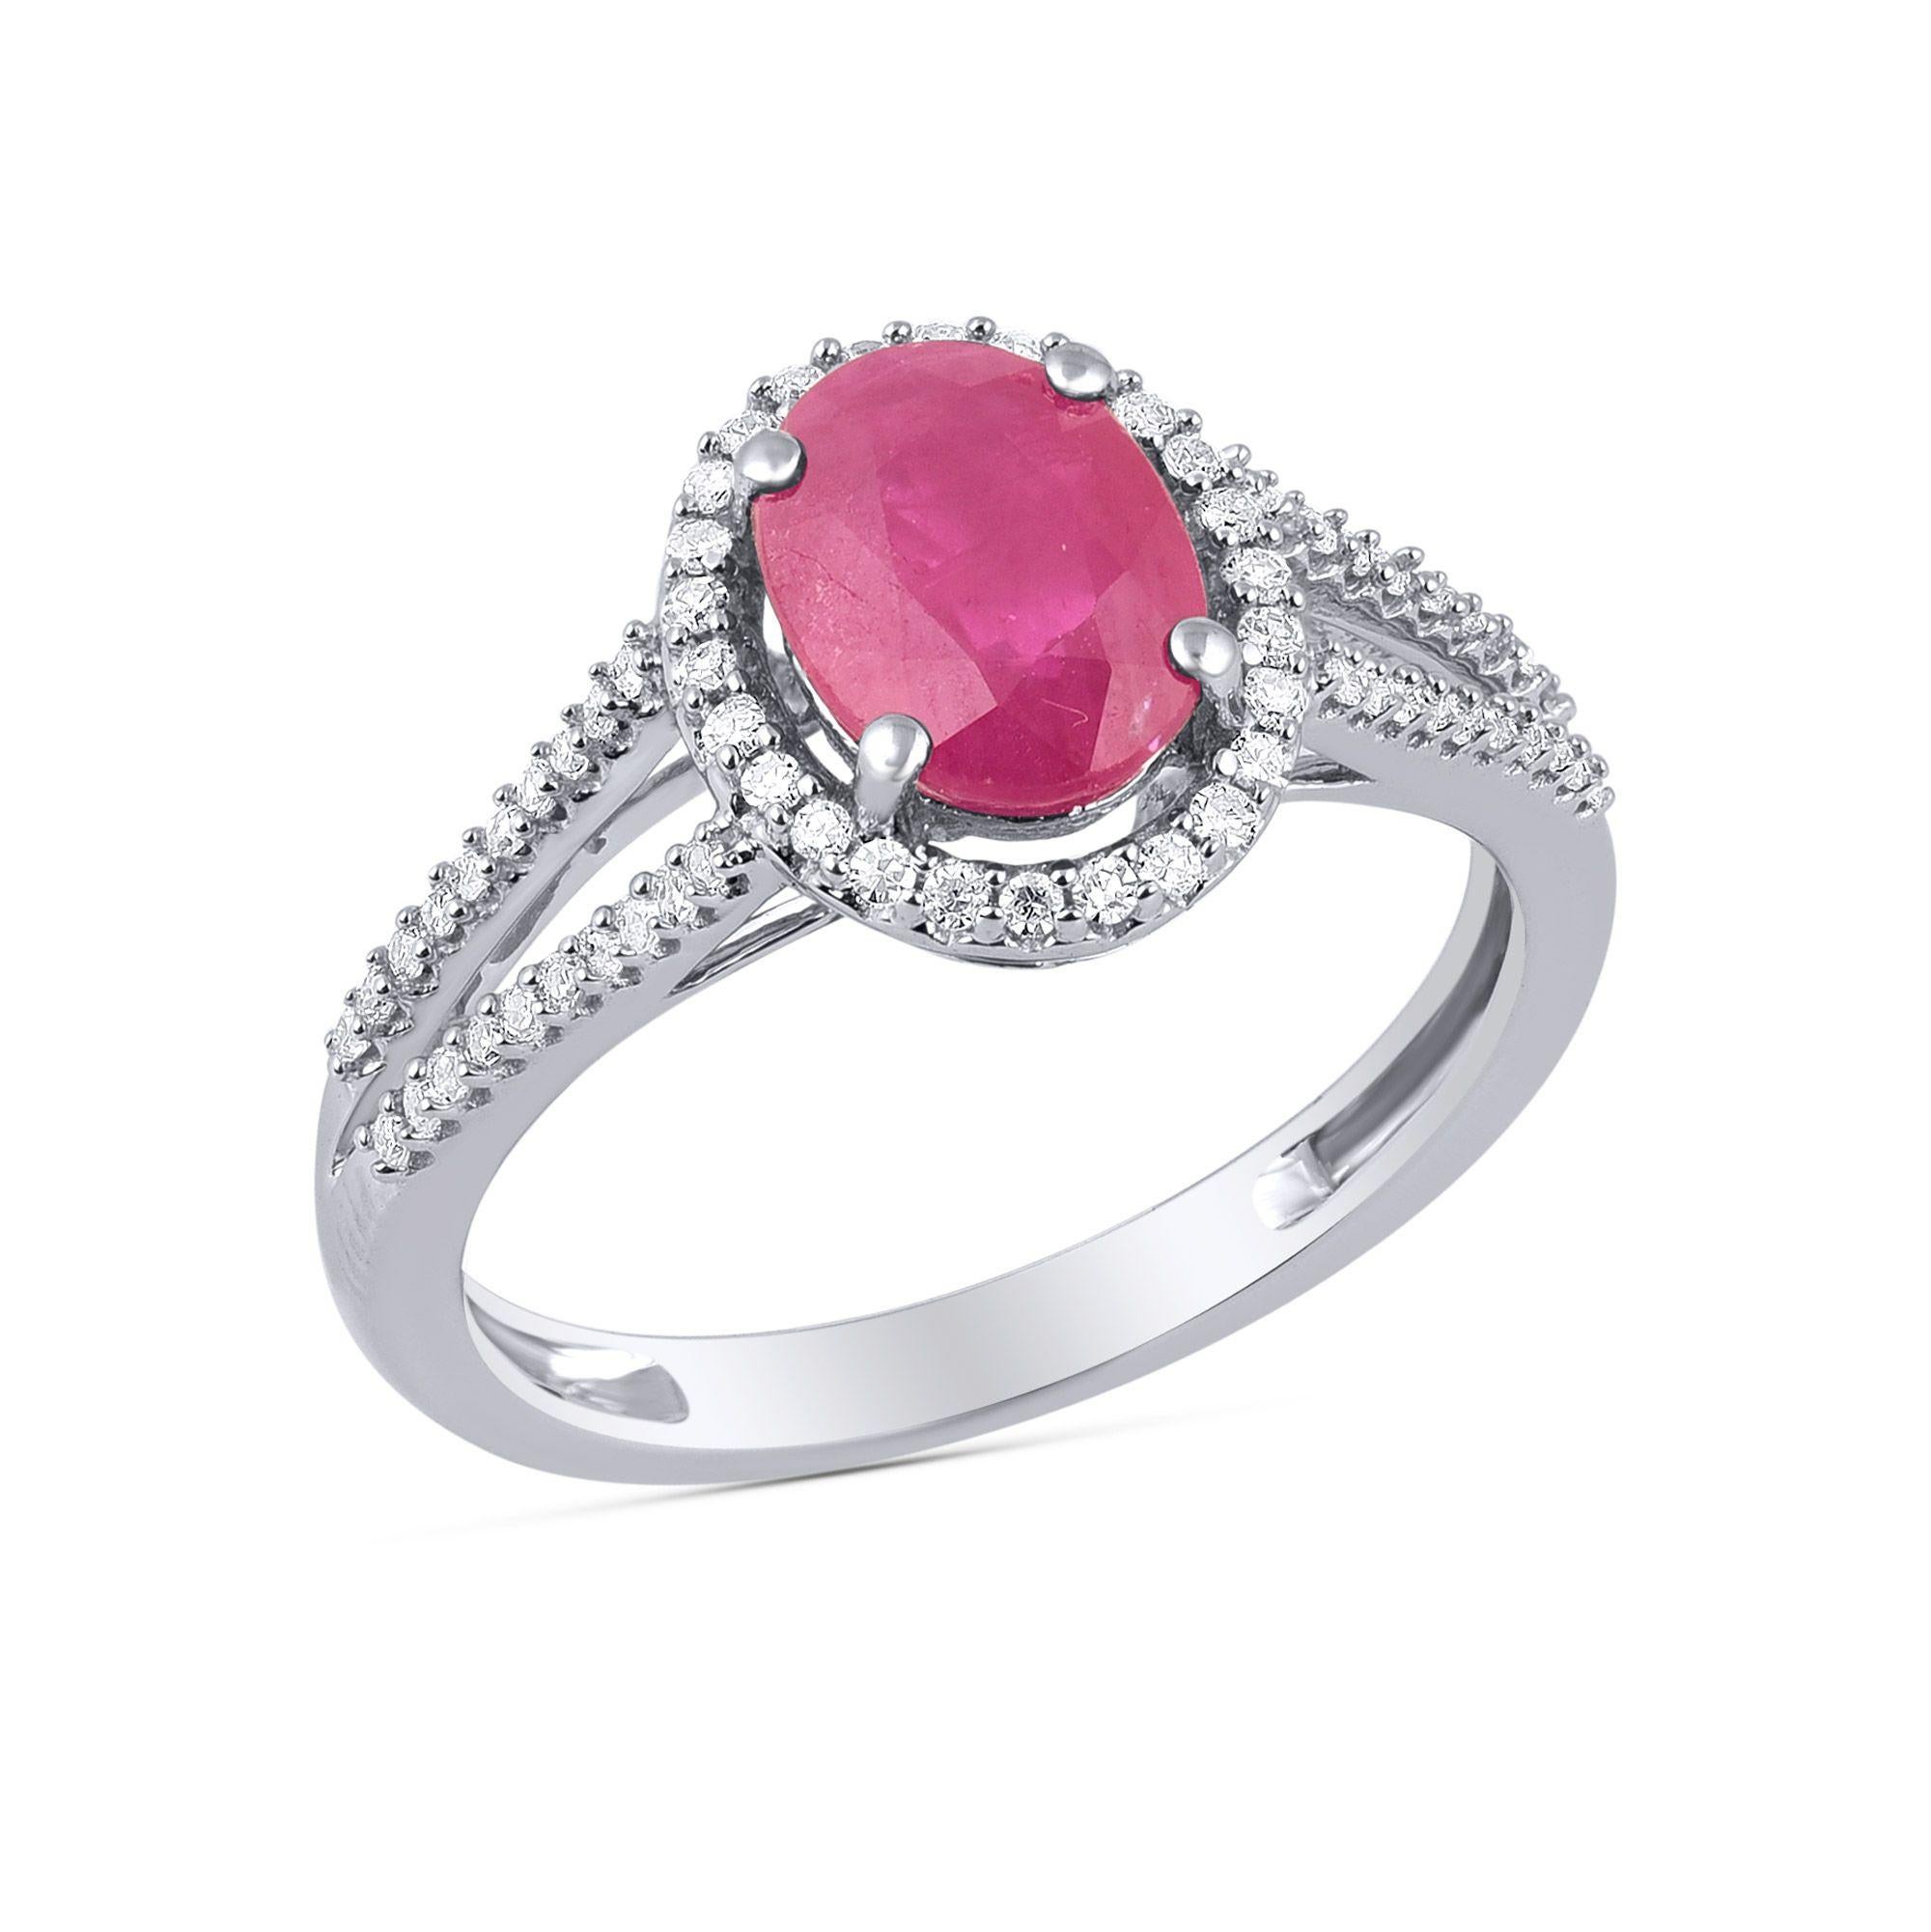 This 0.20 carat split shank diamond and ruby engagement ring is made in 18 karat white gold and studded with 66 round-cut diamonds and 1 oval shaped ruby gemstone in prong and pressure setting. Diamonds are graded H-I Color, I1-I2 Clarity
